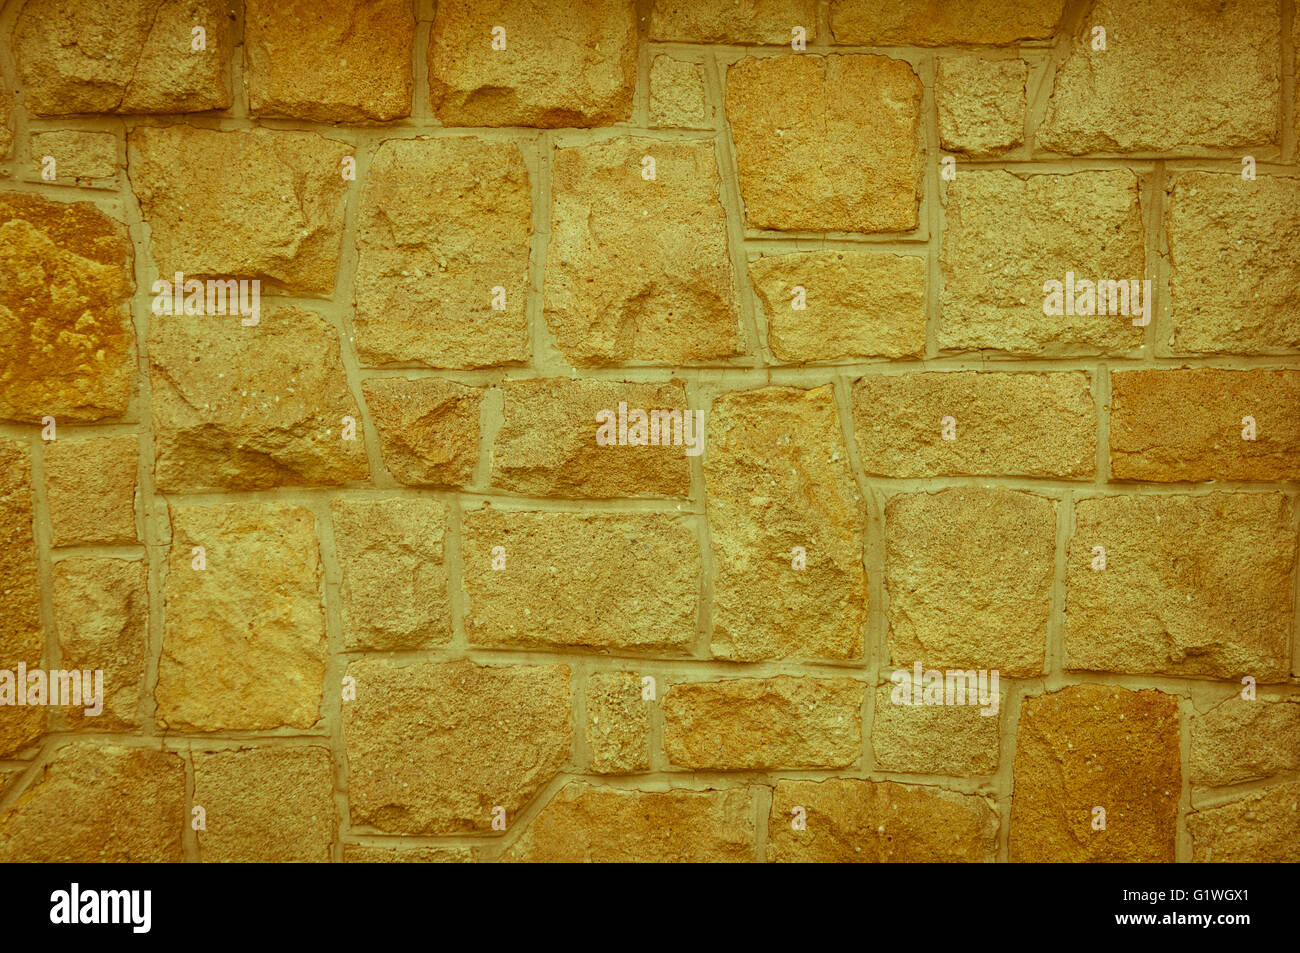 Light yellowish-brown Old stone vintage background textured Stock Photo